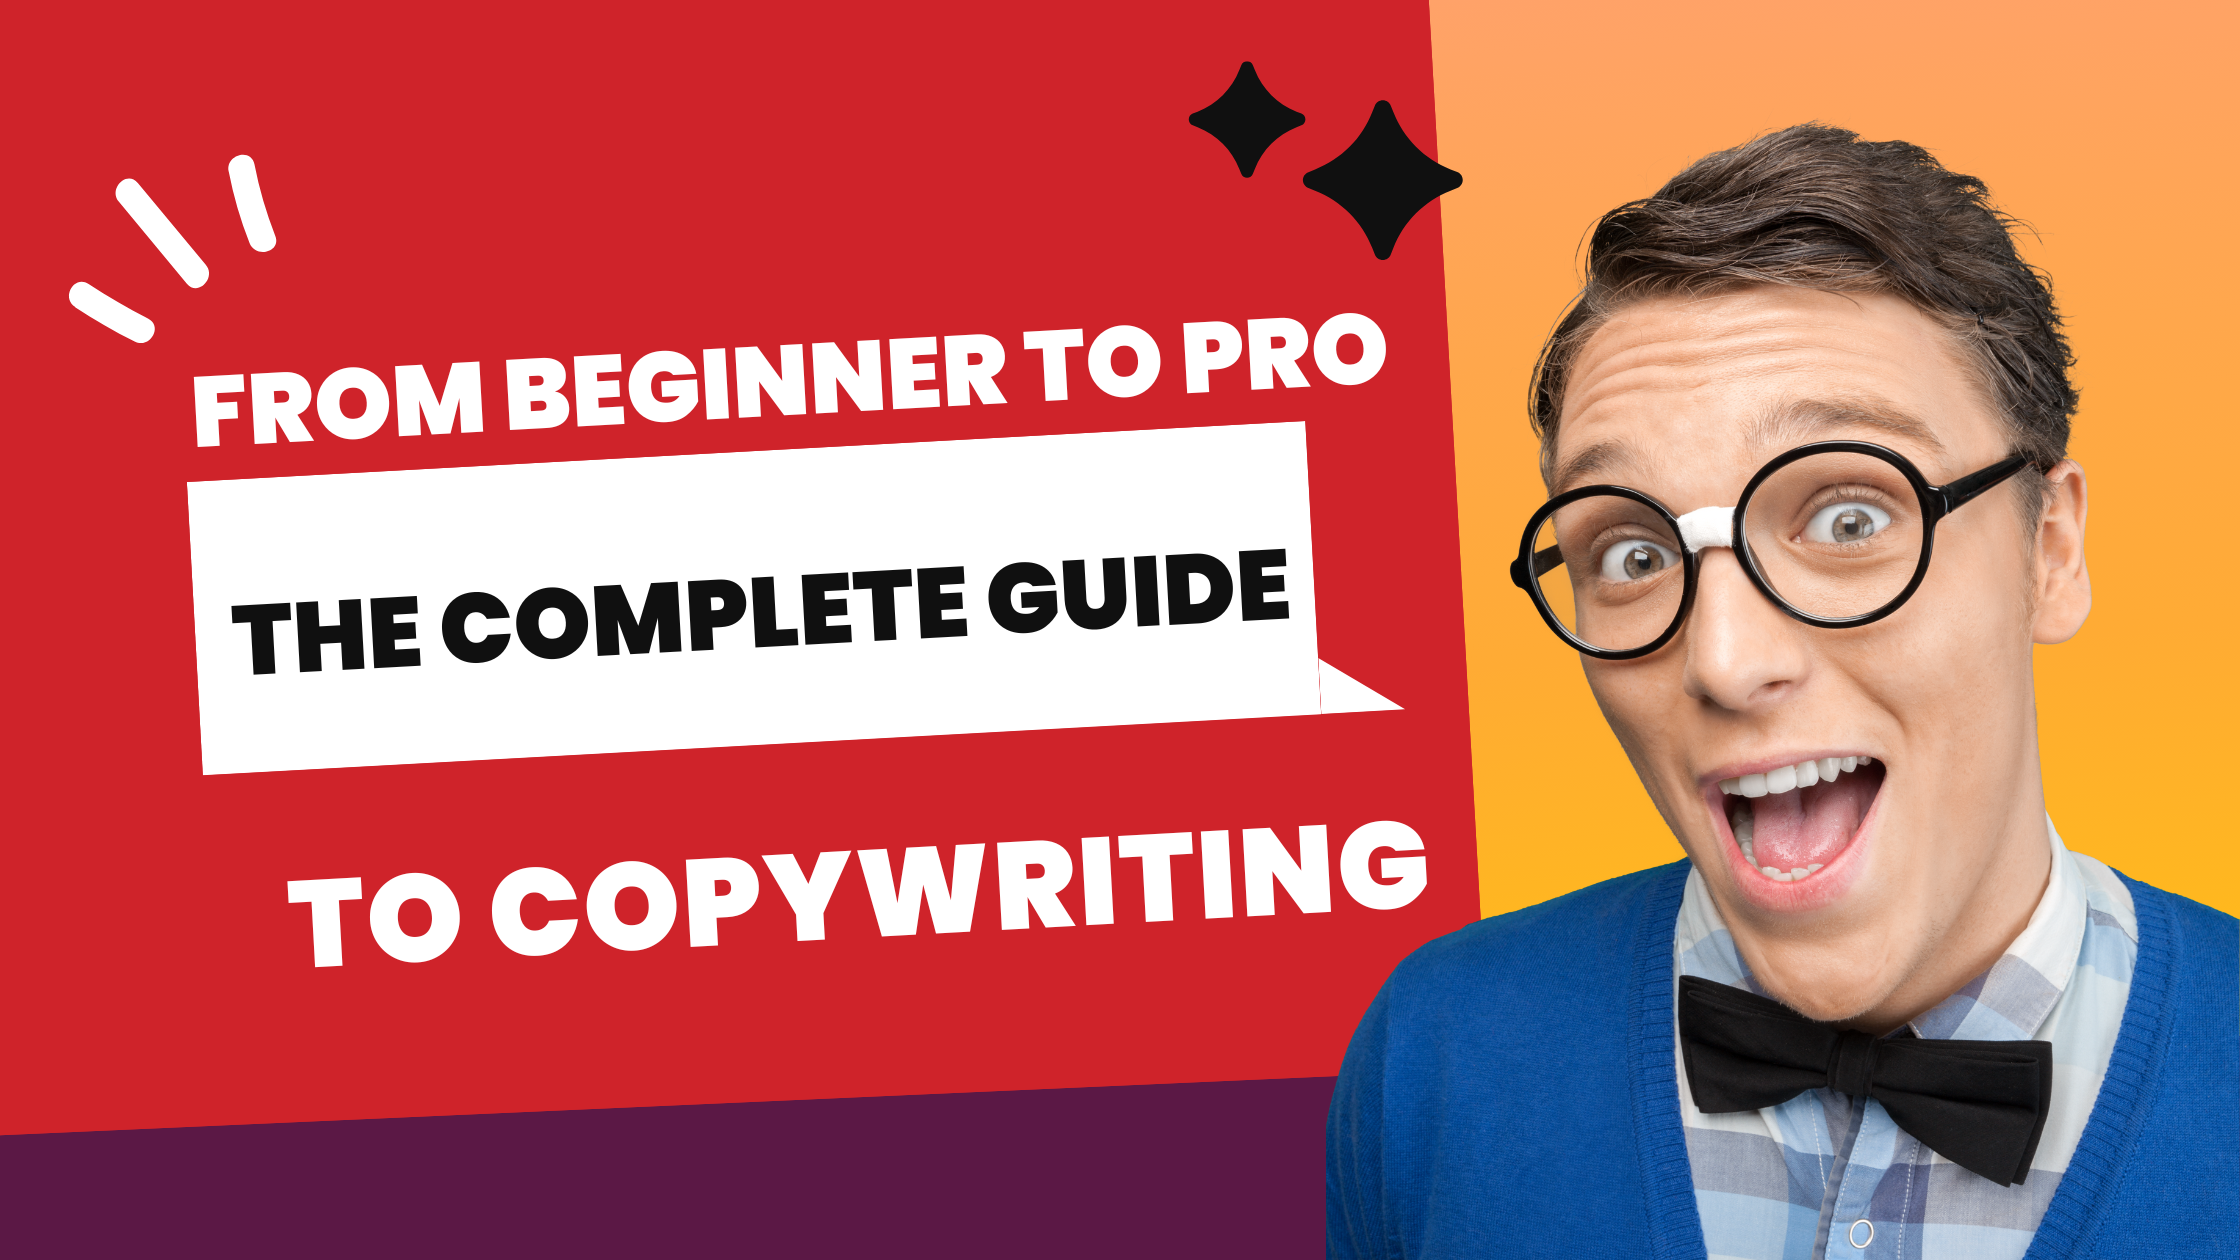 The Complete Guide to Copywriting